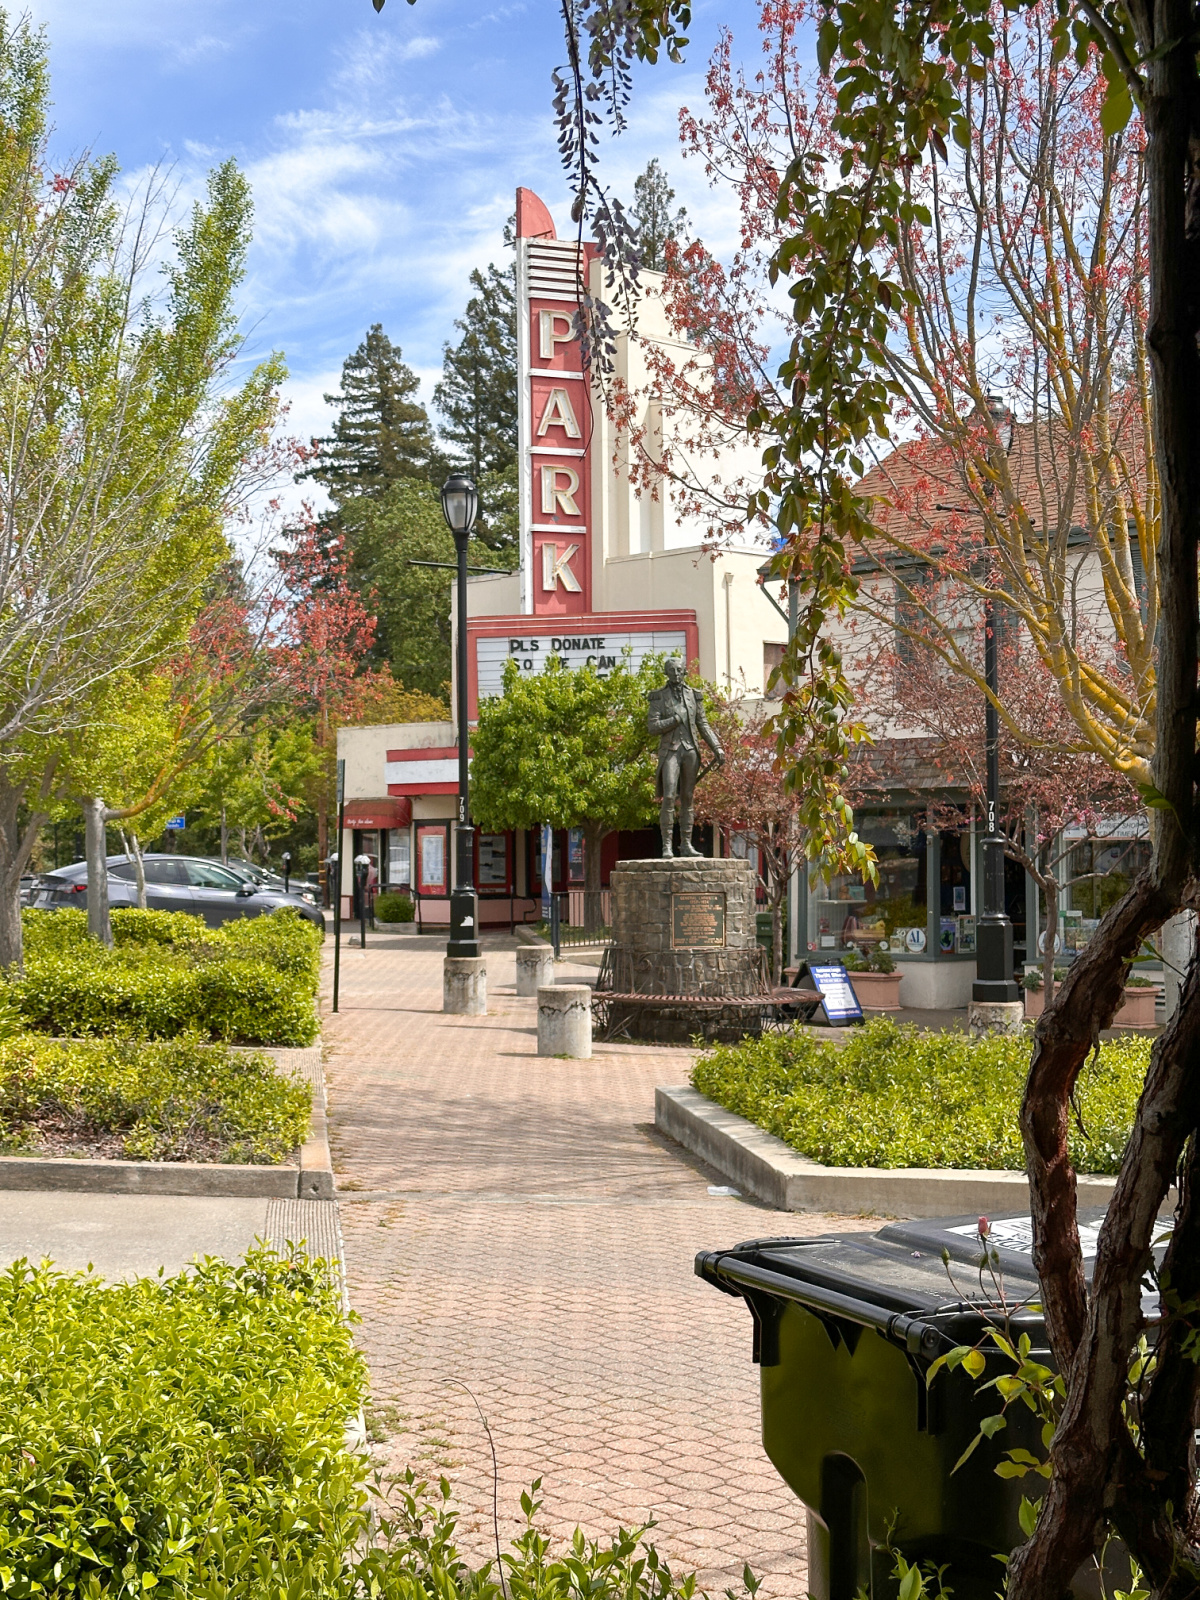 Downtown Lafayette, California Park Theater and town plaza.